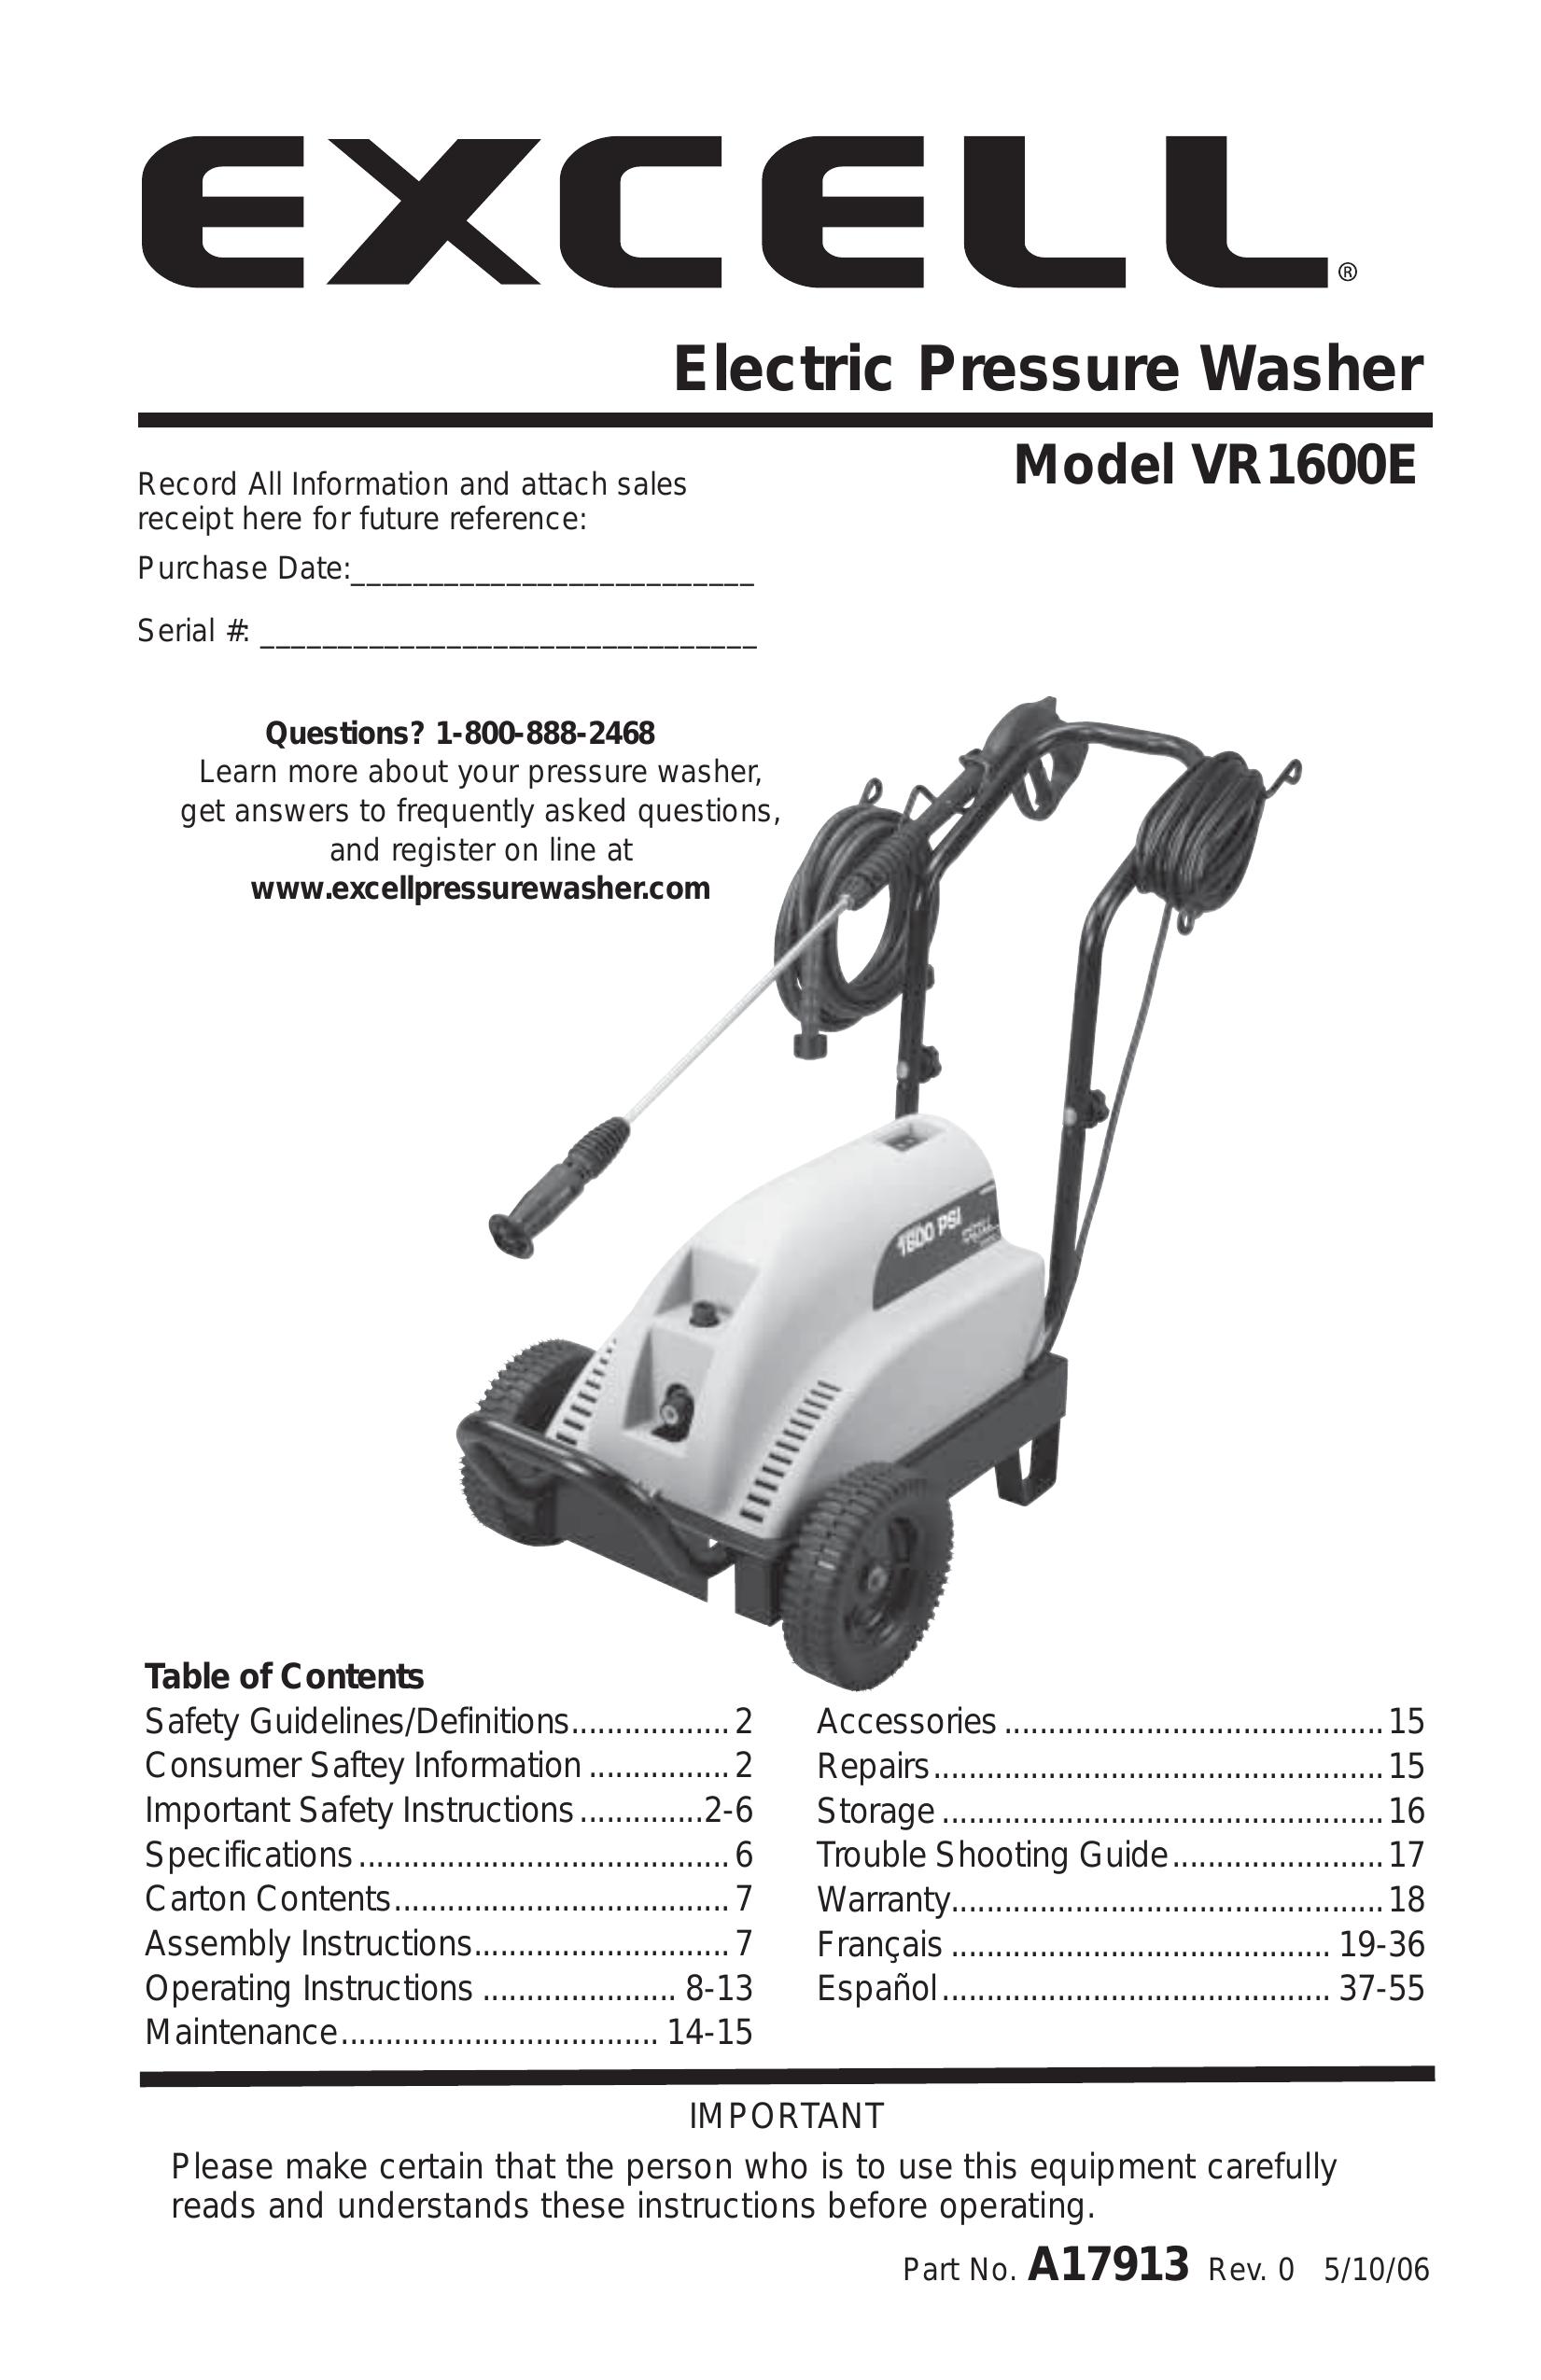 DeVillbiss Air Power Company A17913 Pressure Washer User Manual